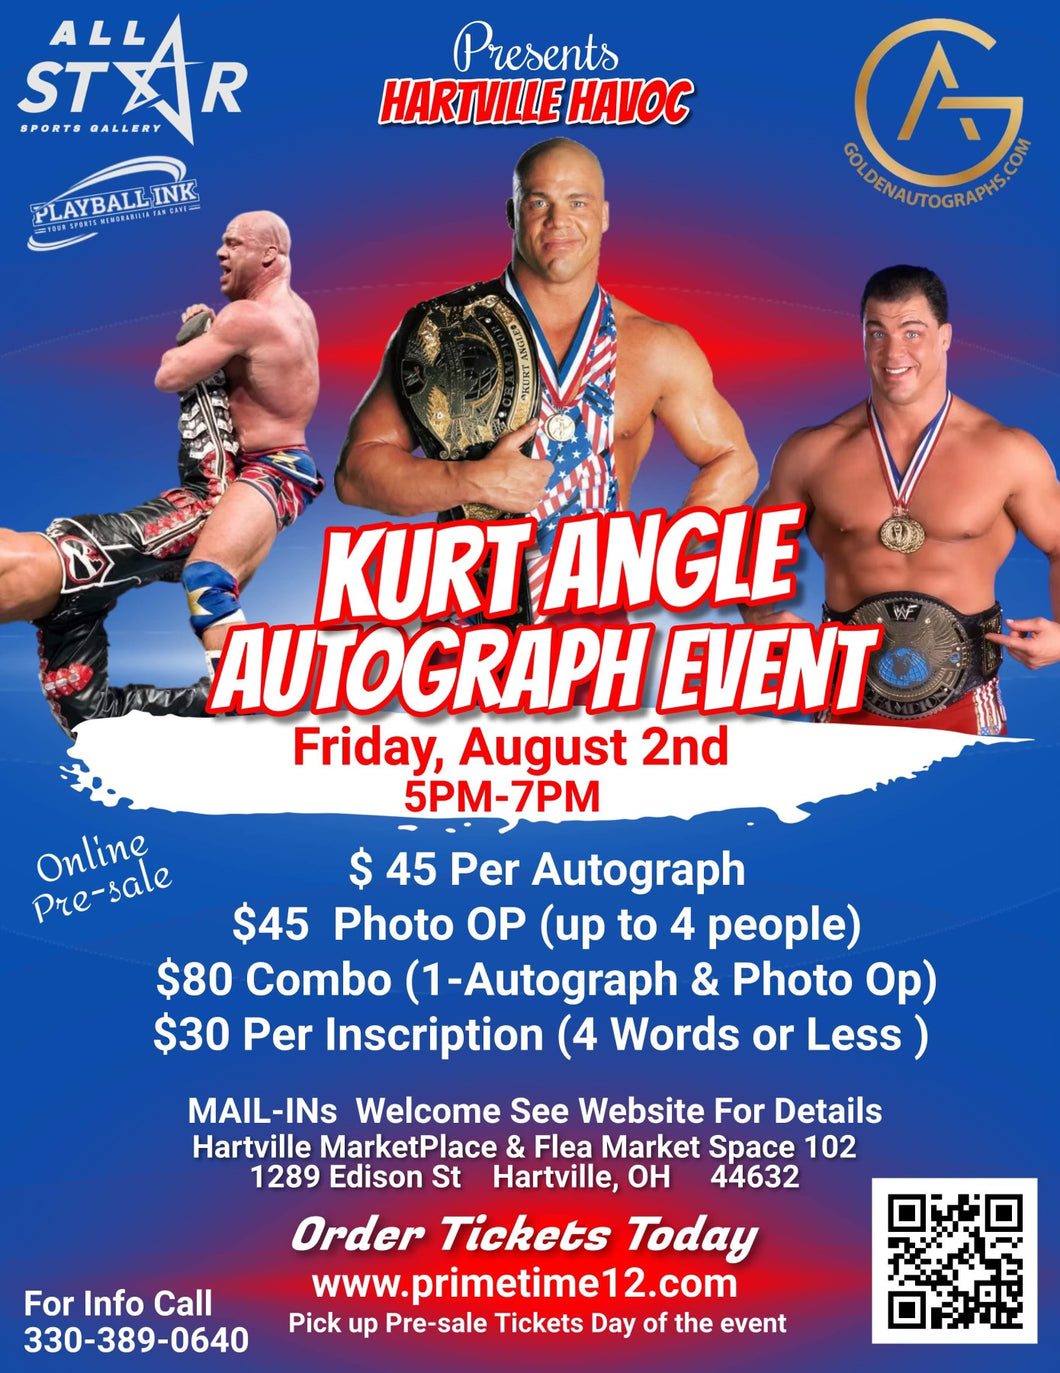 KURT ANGLE Pre-Sale for PHOTO OP ticket to have your photo taken with him